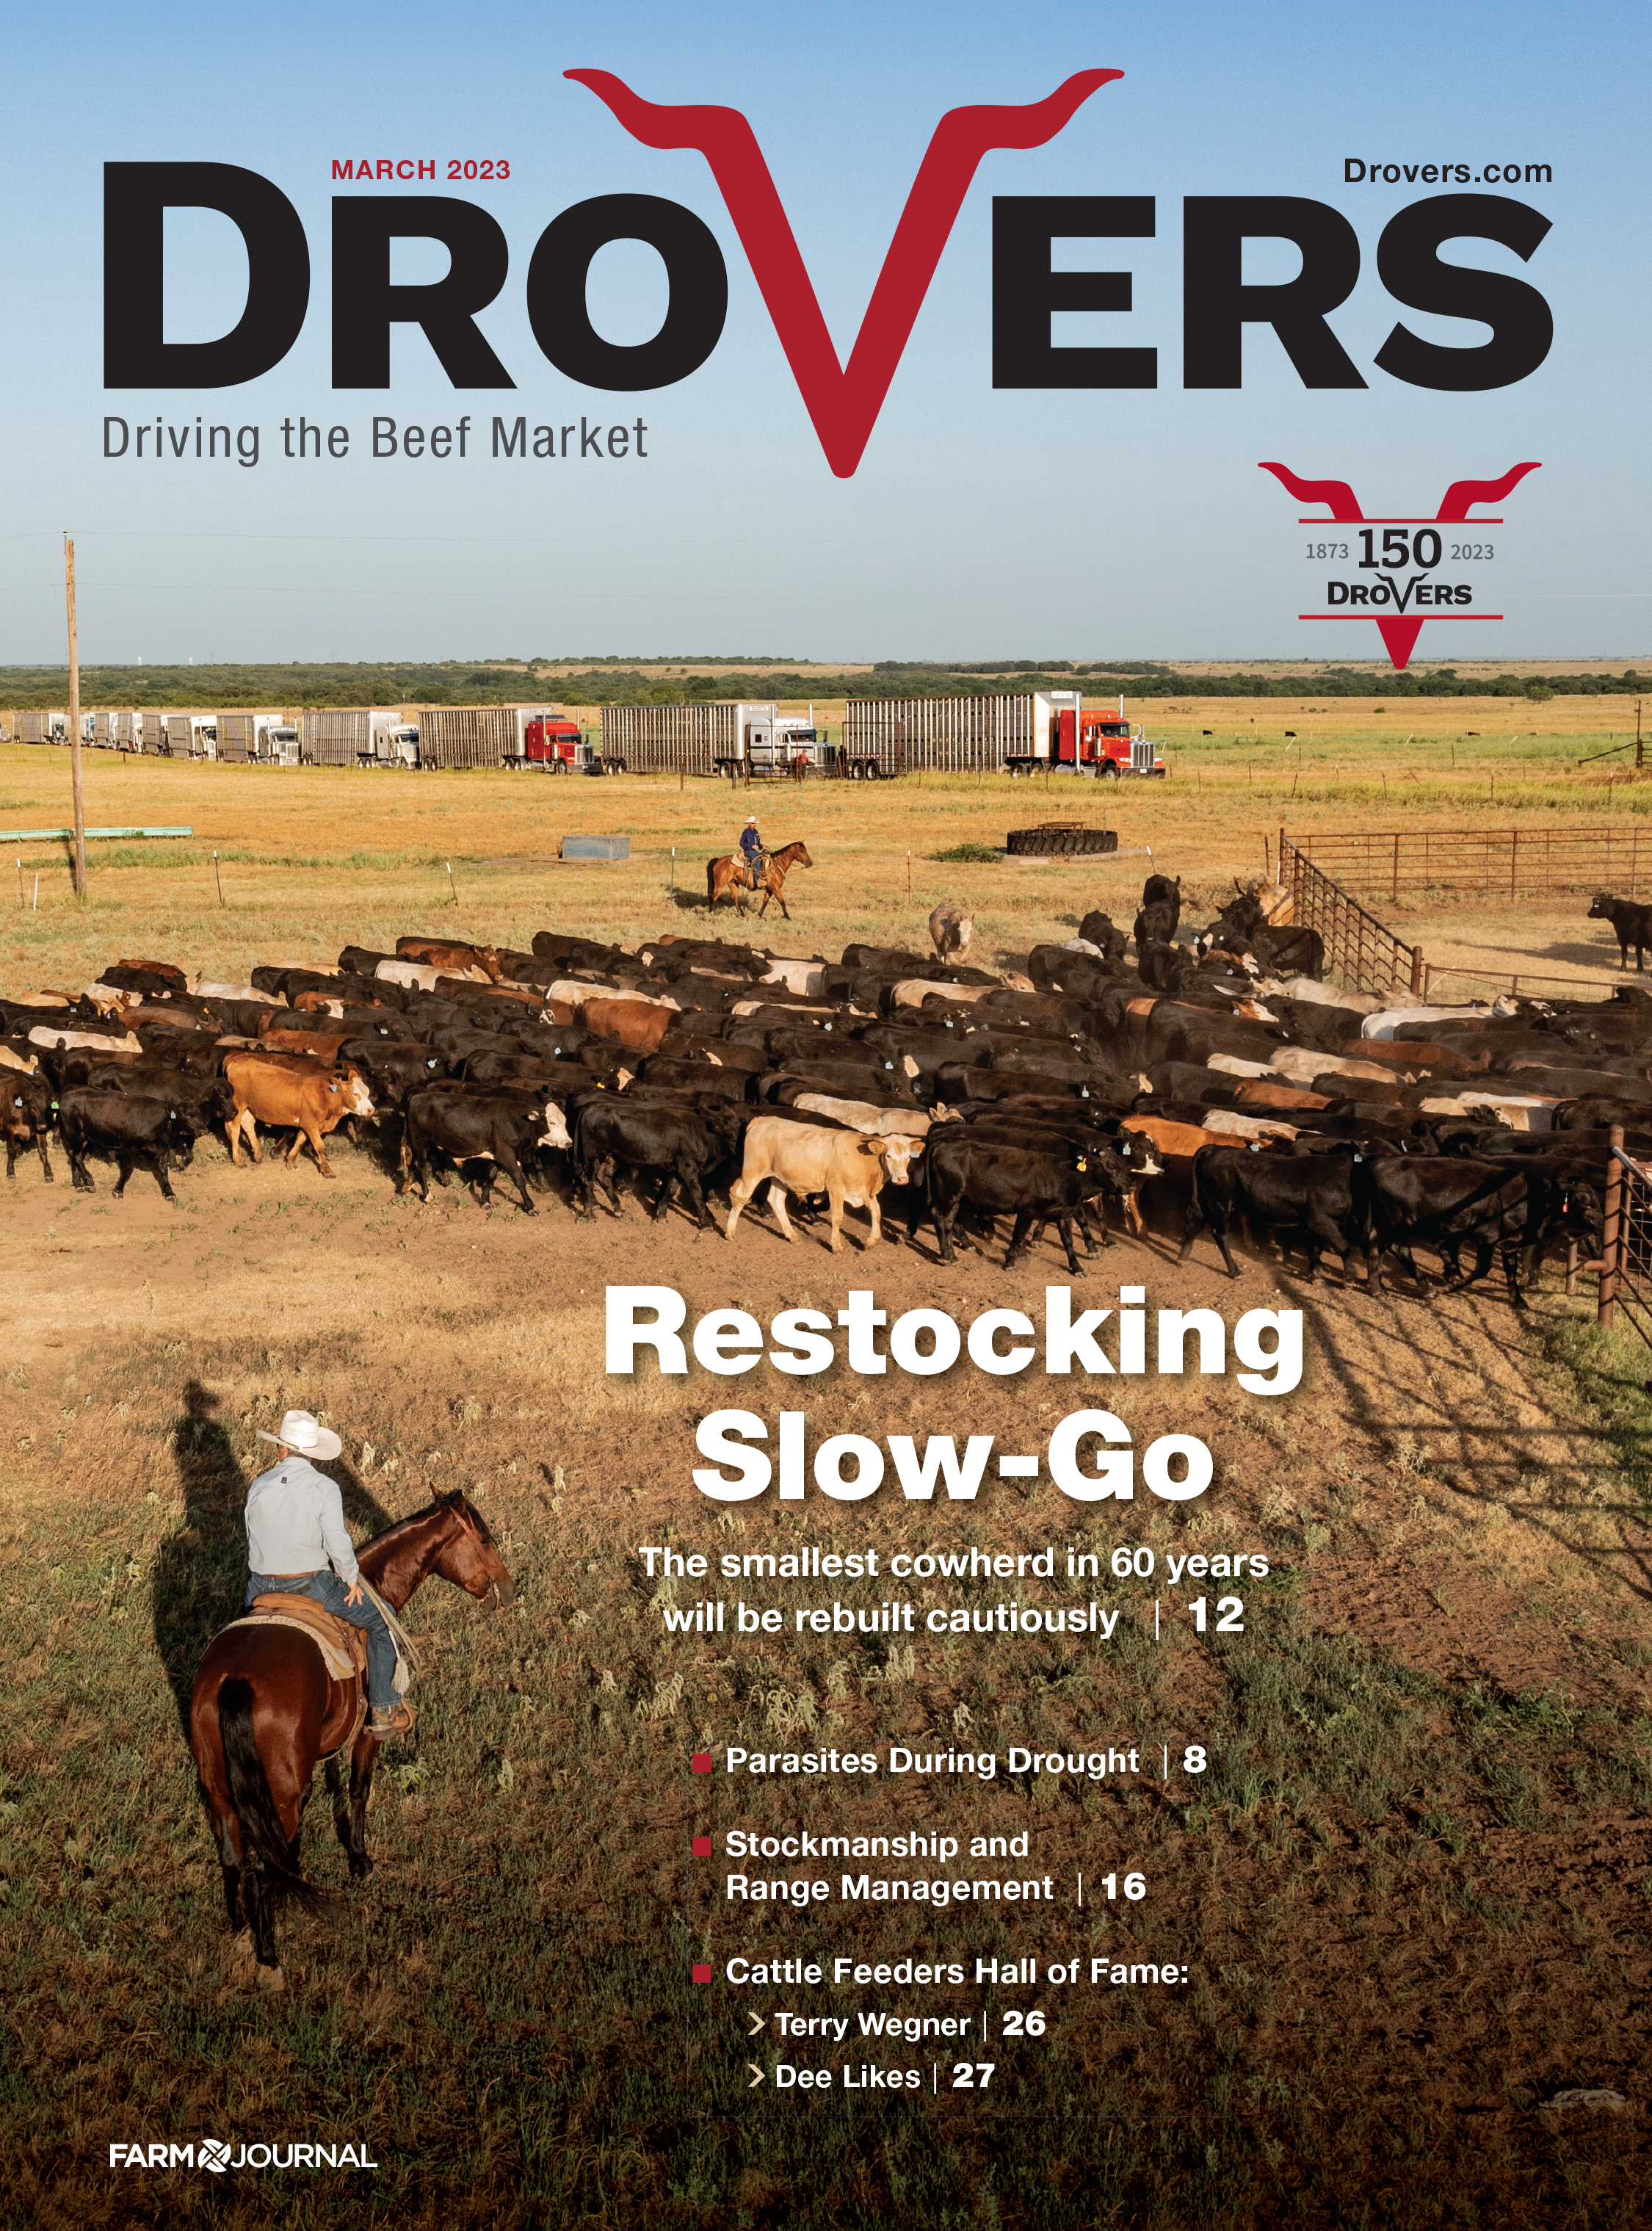  Drovers - March 2023 Cover 